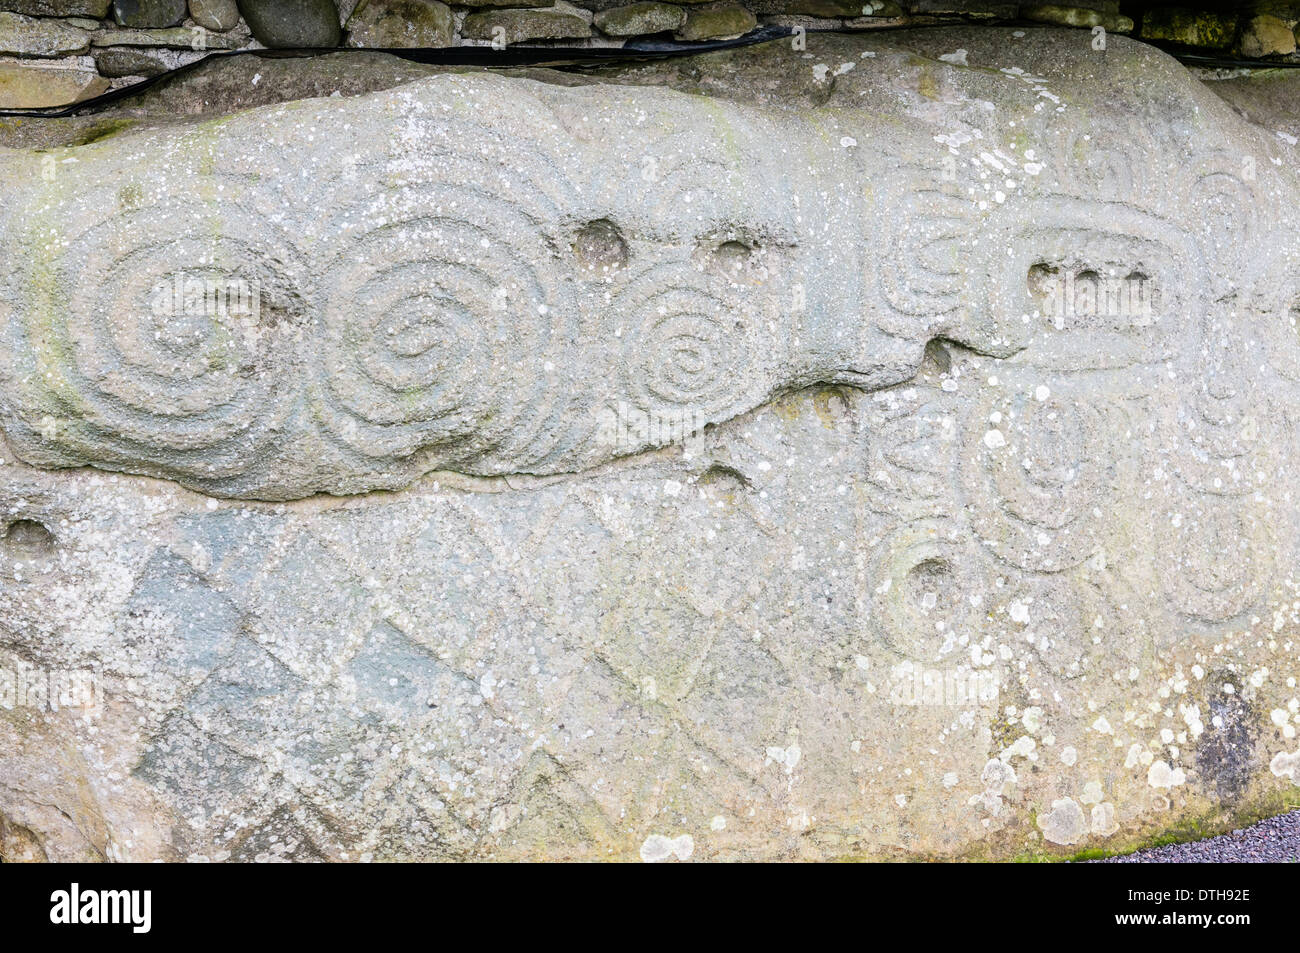 Spiral and lozenge carvings on one of the kerb stones at Newgrange chambered passage tomb Stock Photo